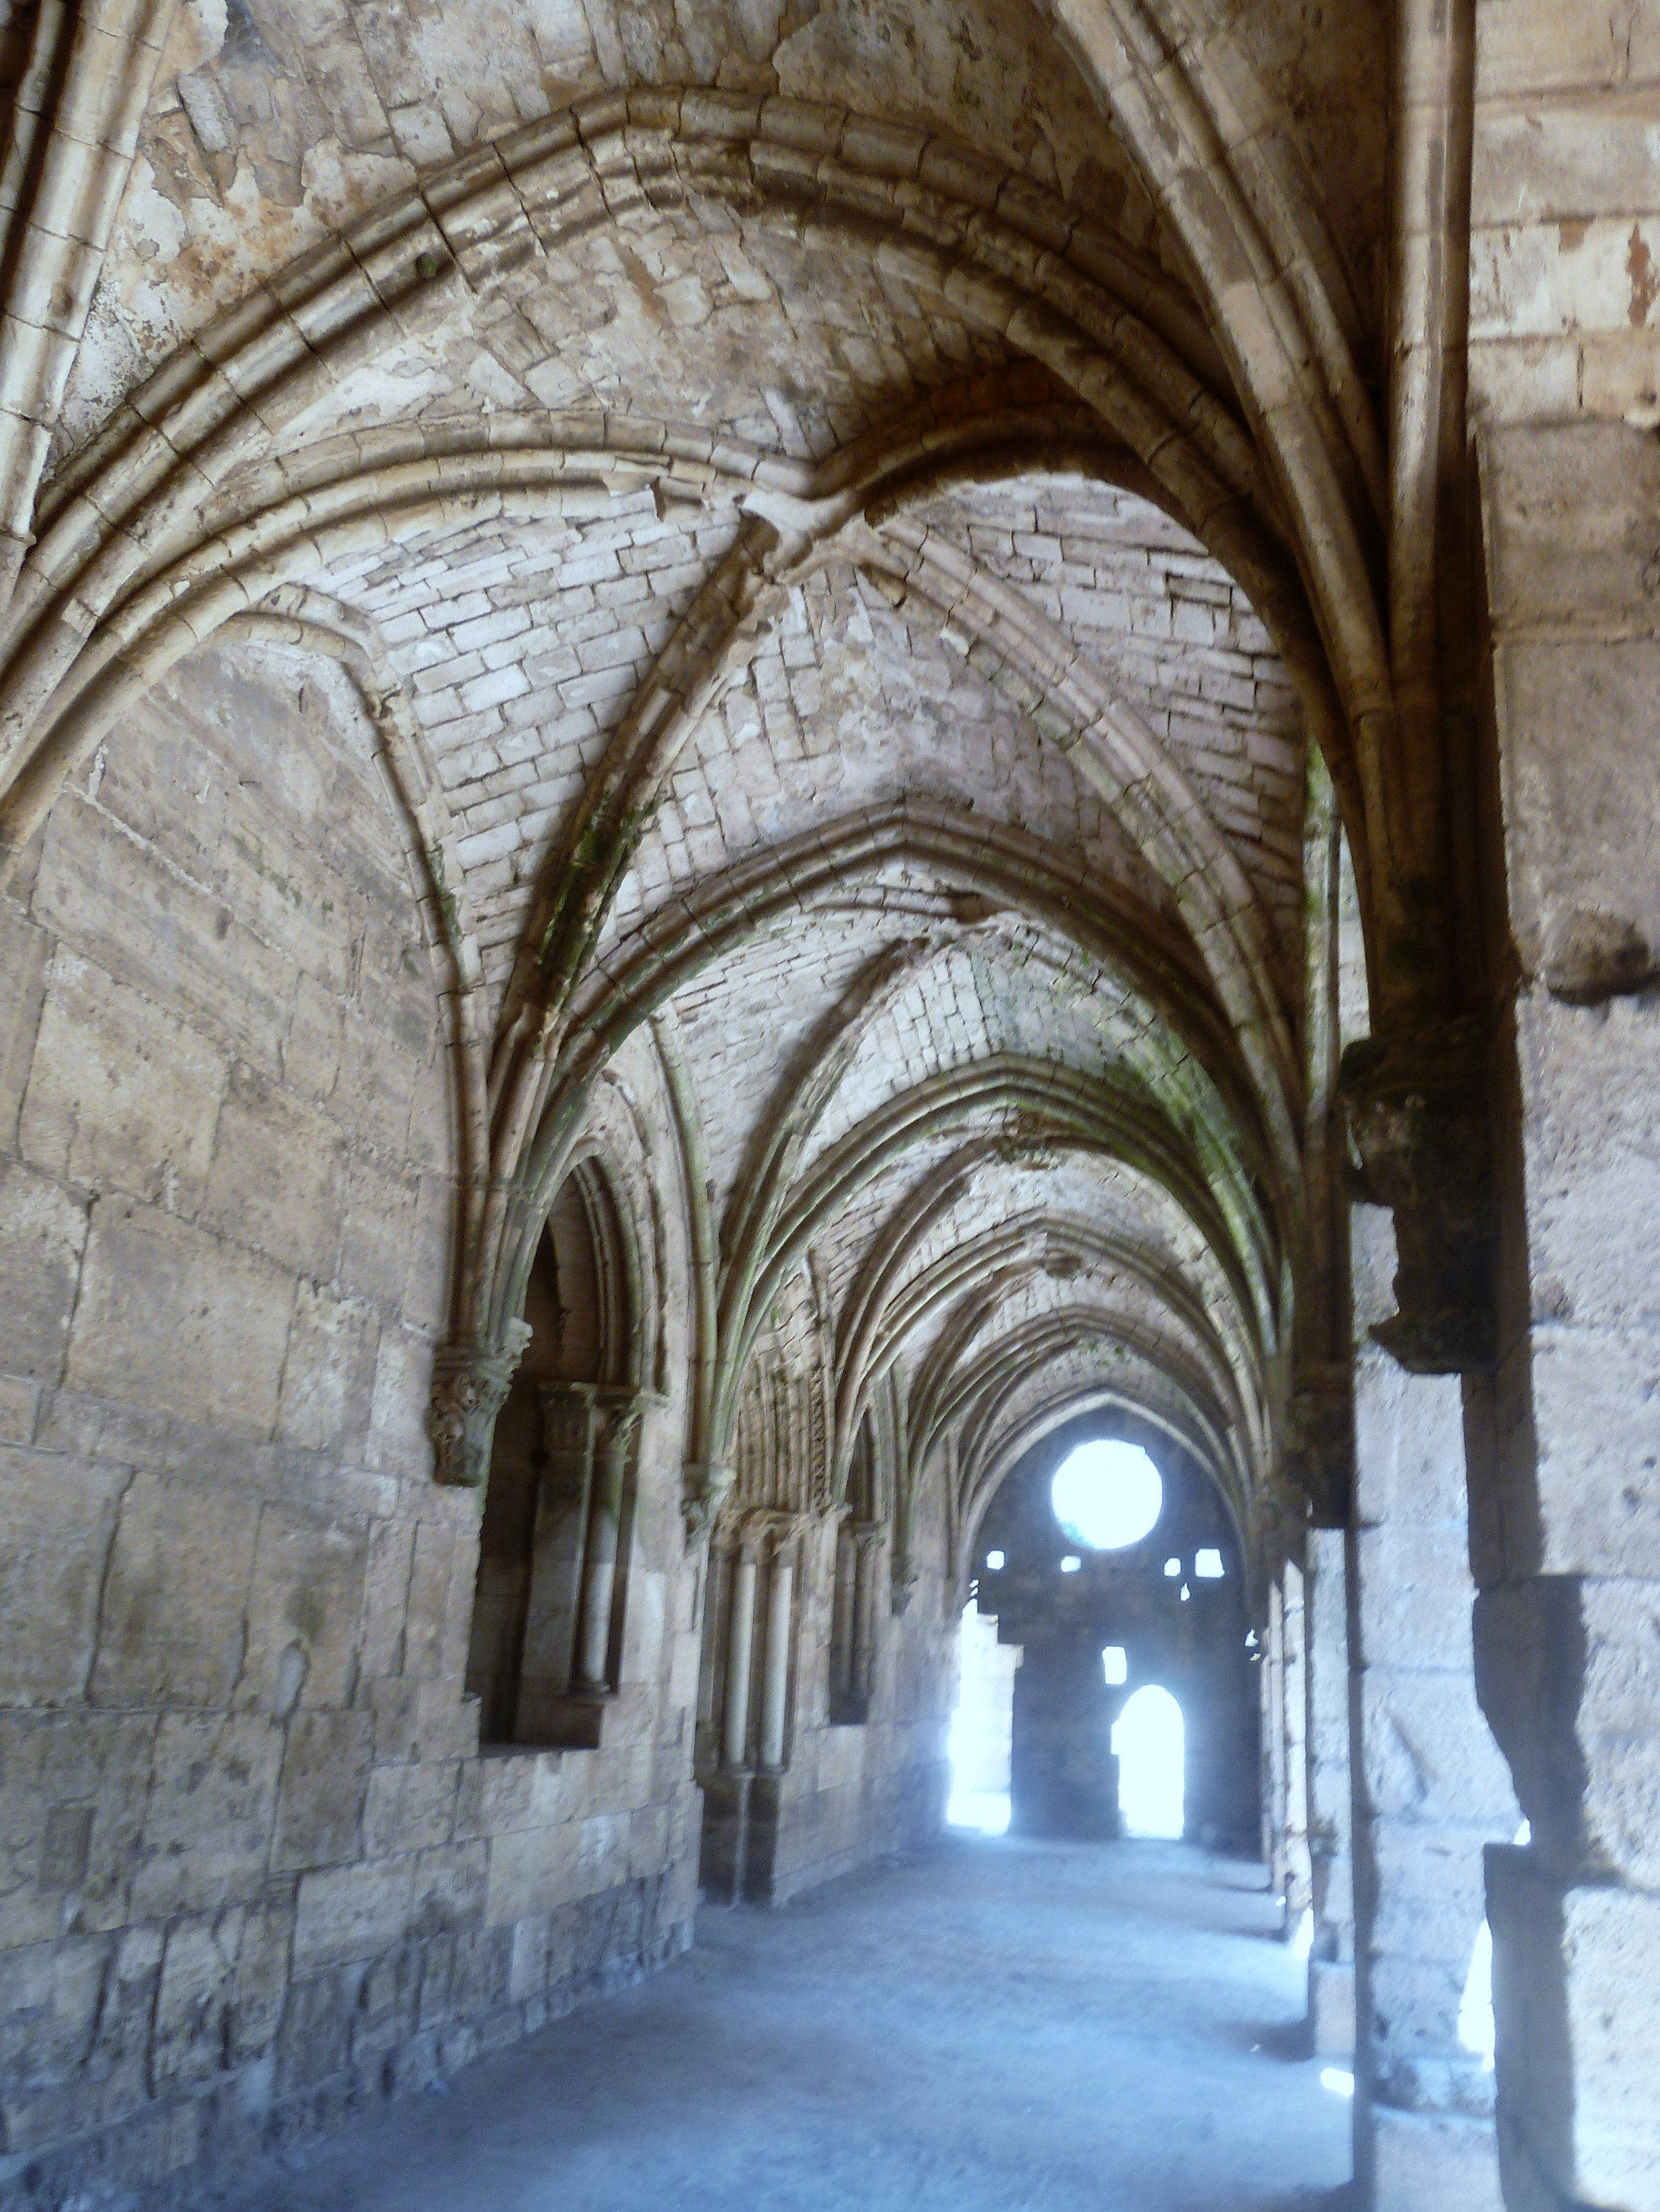 Crusader Castle ogival vaulted ceiling of the Gothic style portico